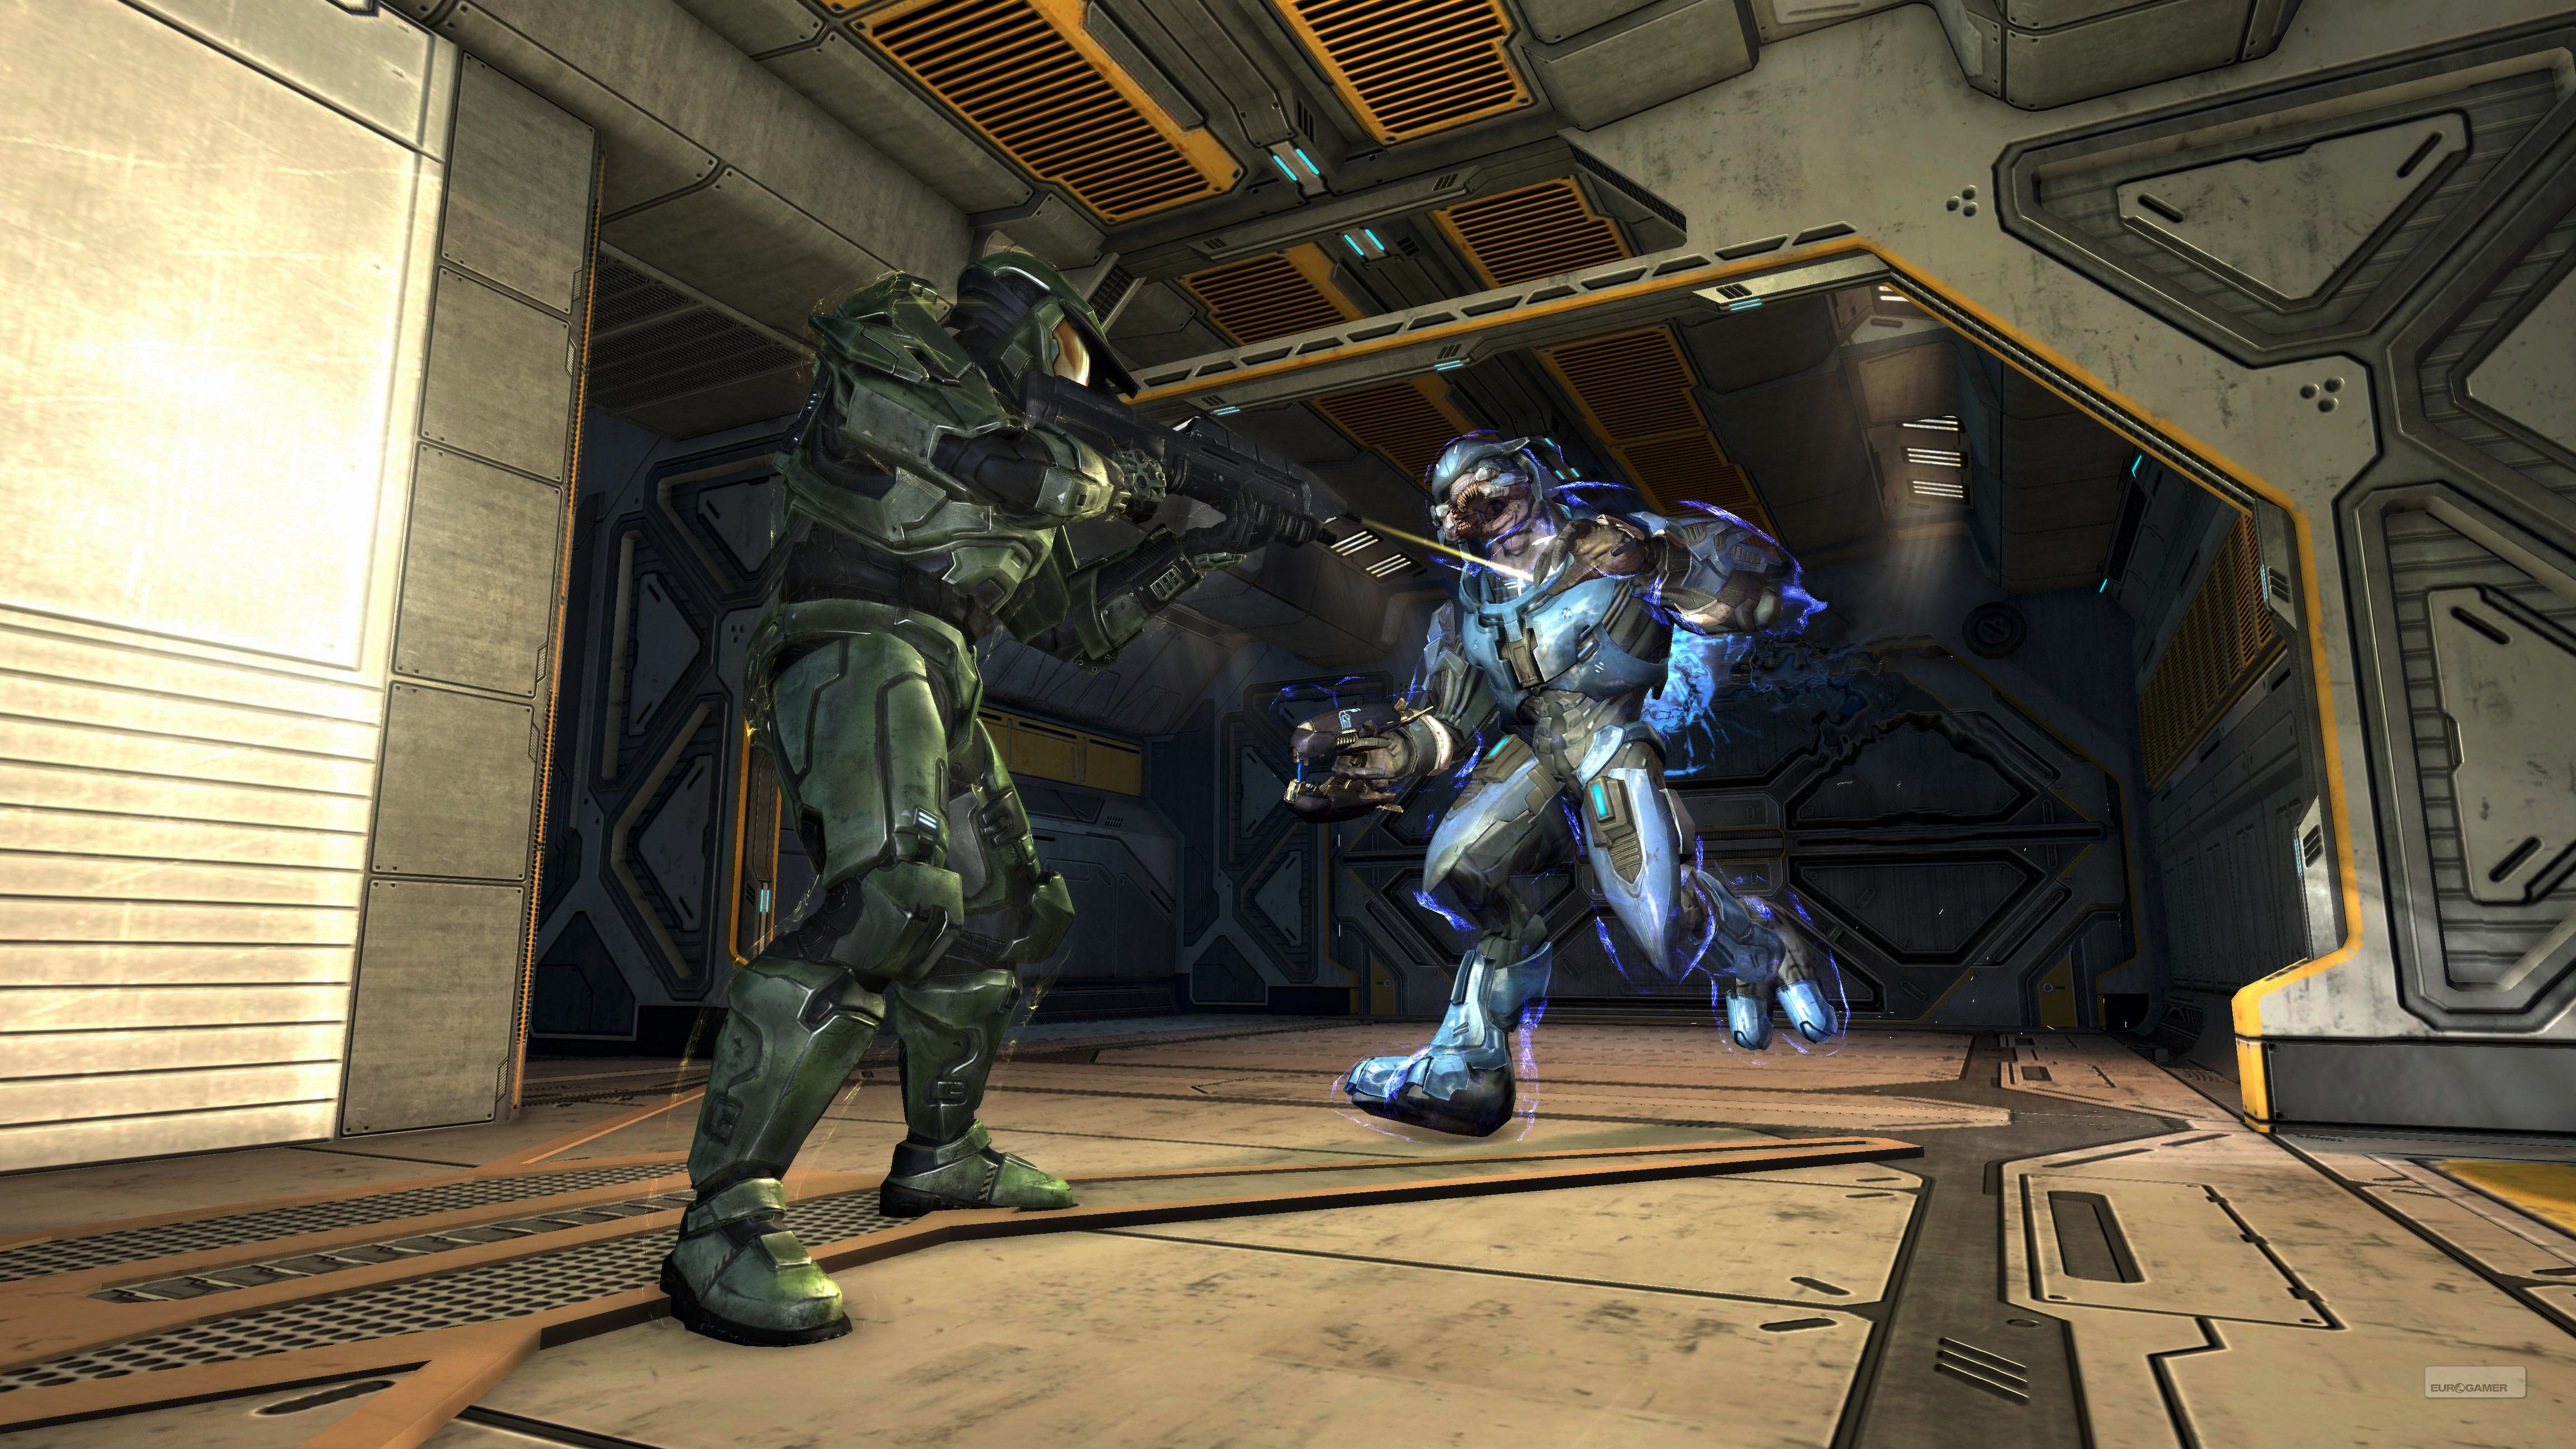 Halo: Combat Evolved Anniversary PC test starts in February